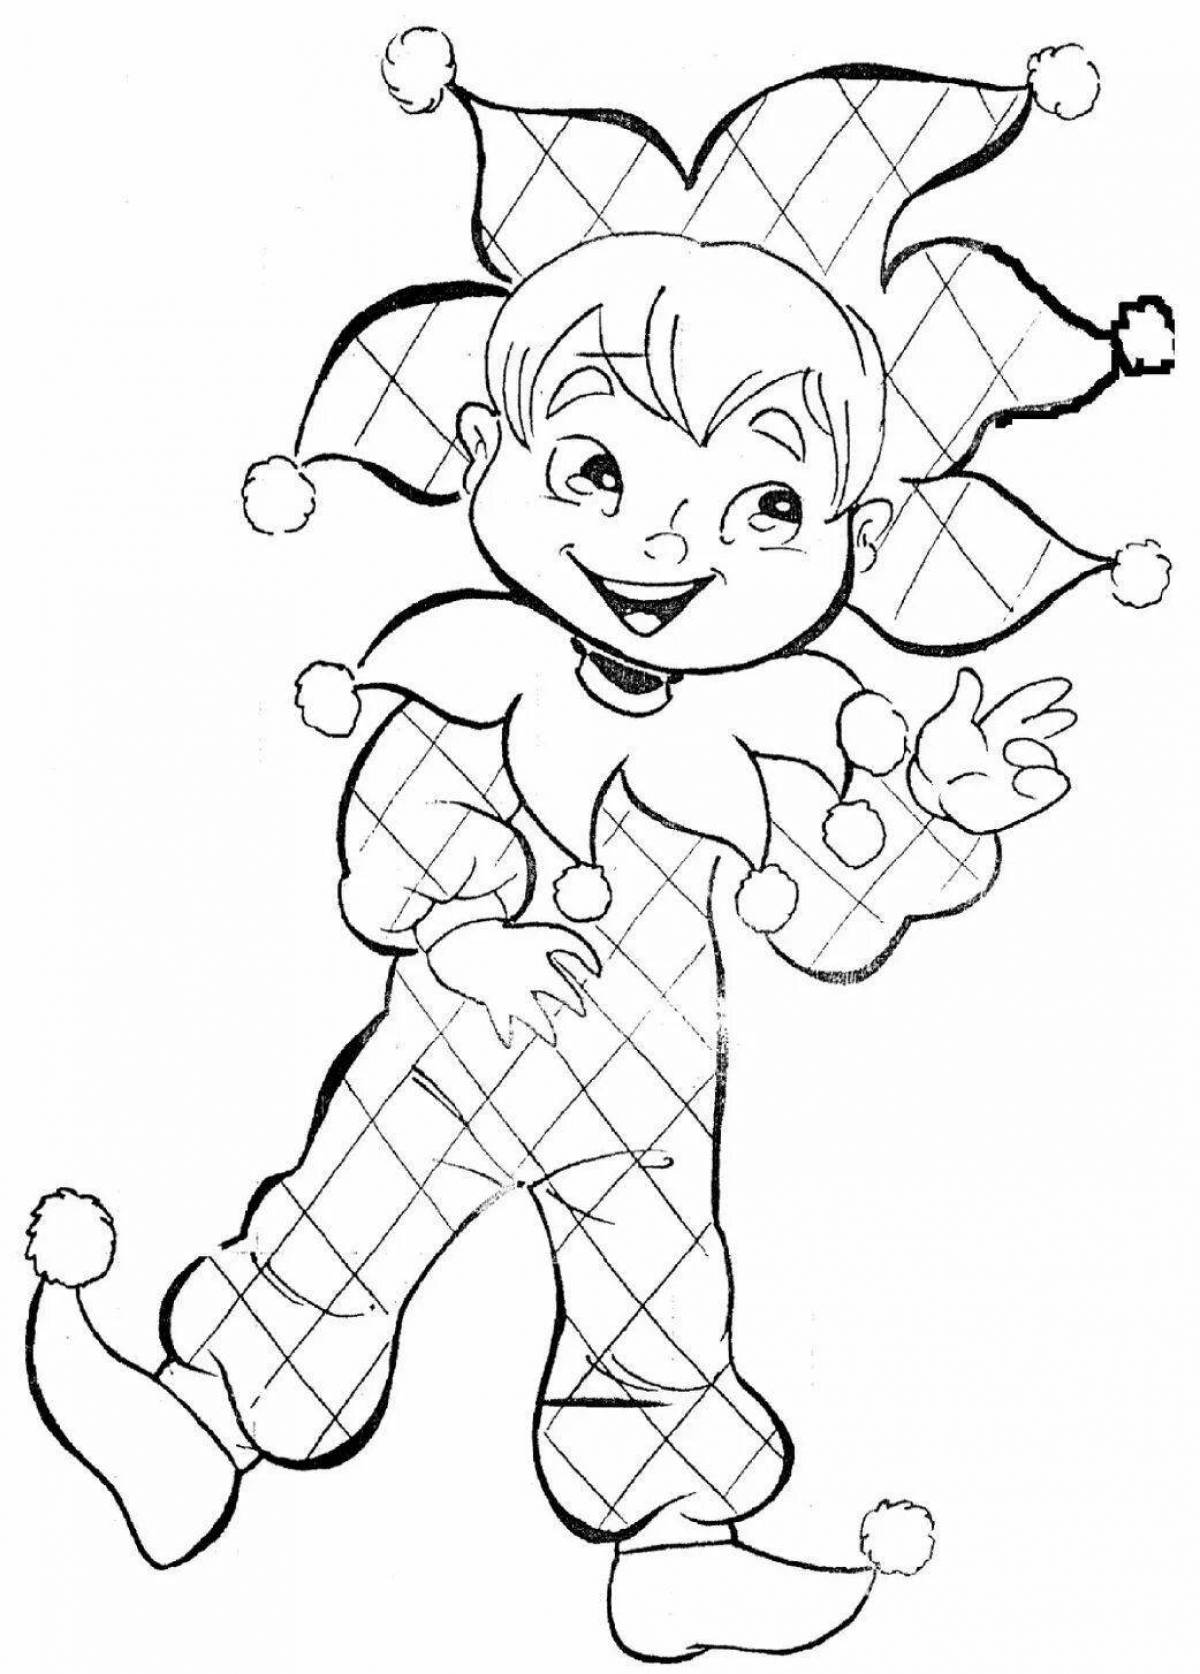 Delightful jester coloring book for kids